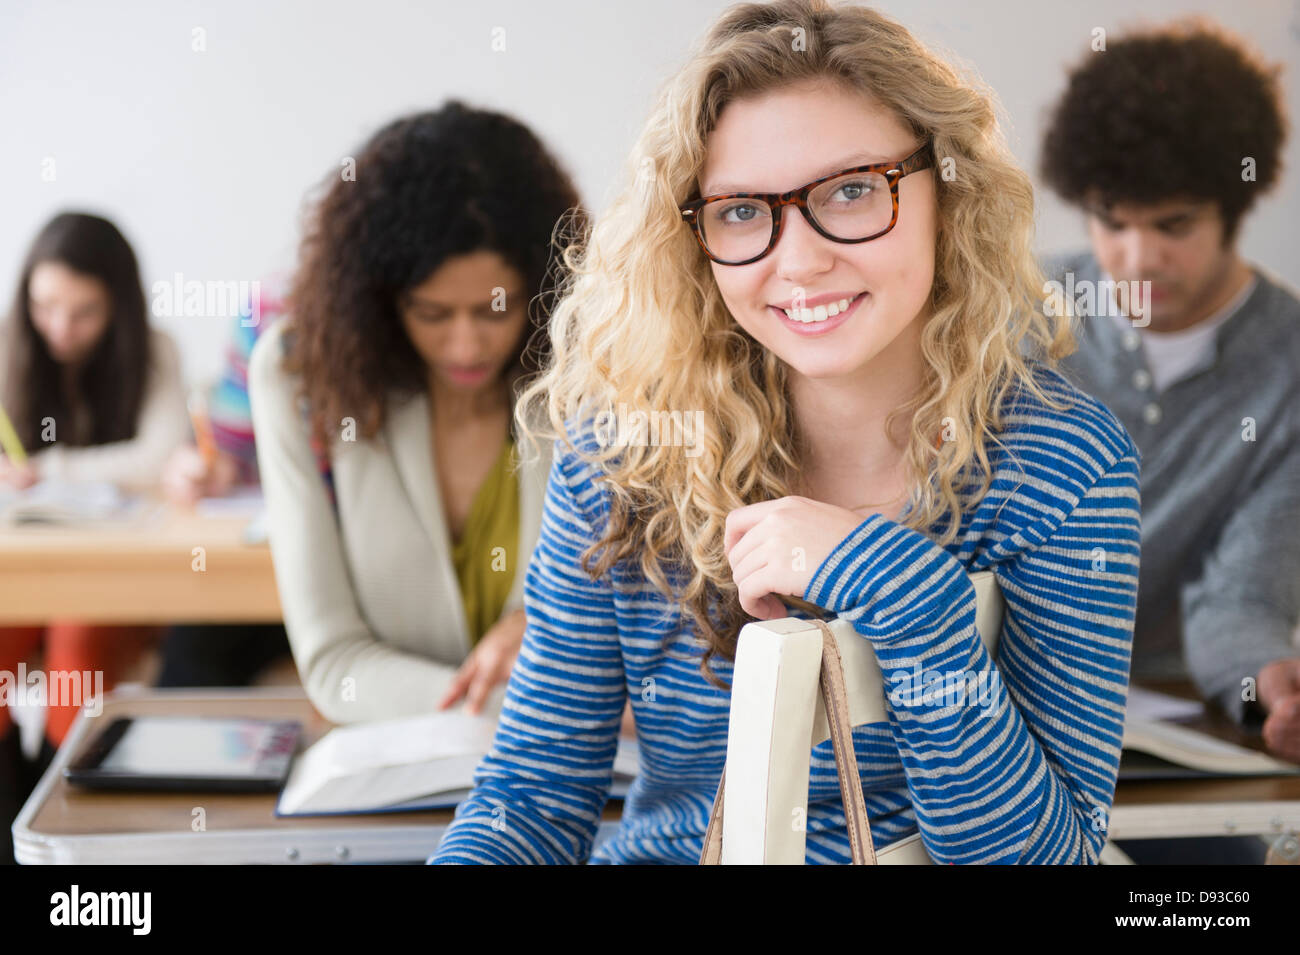 Student smiling in class Stock Photo